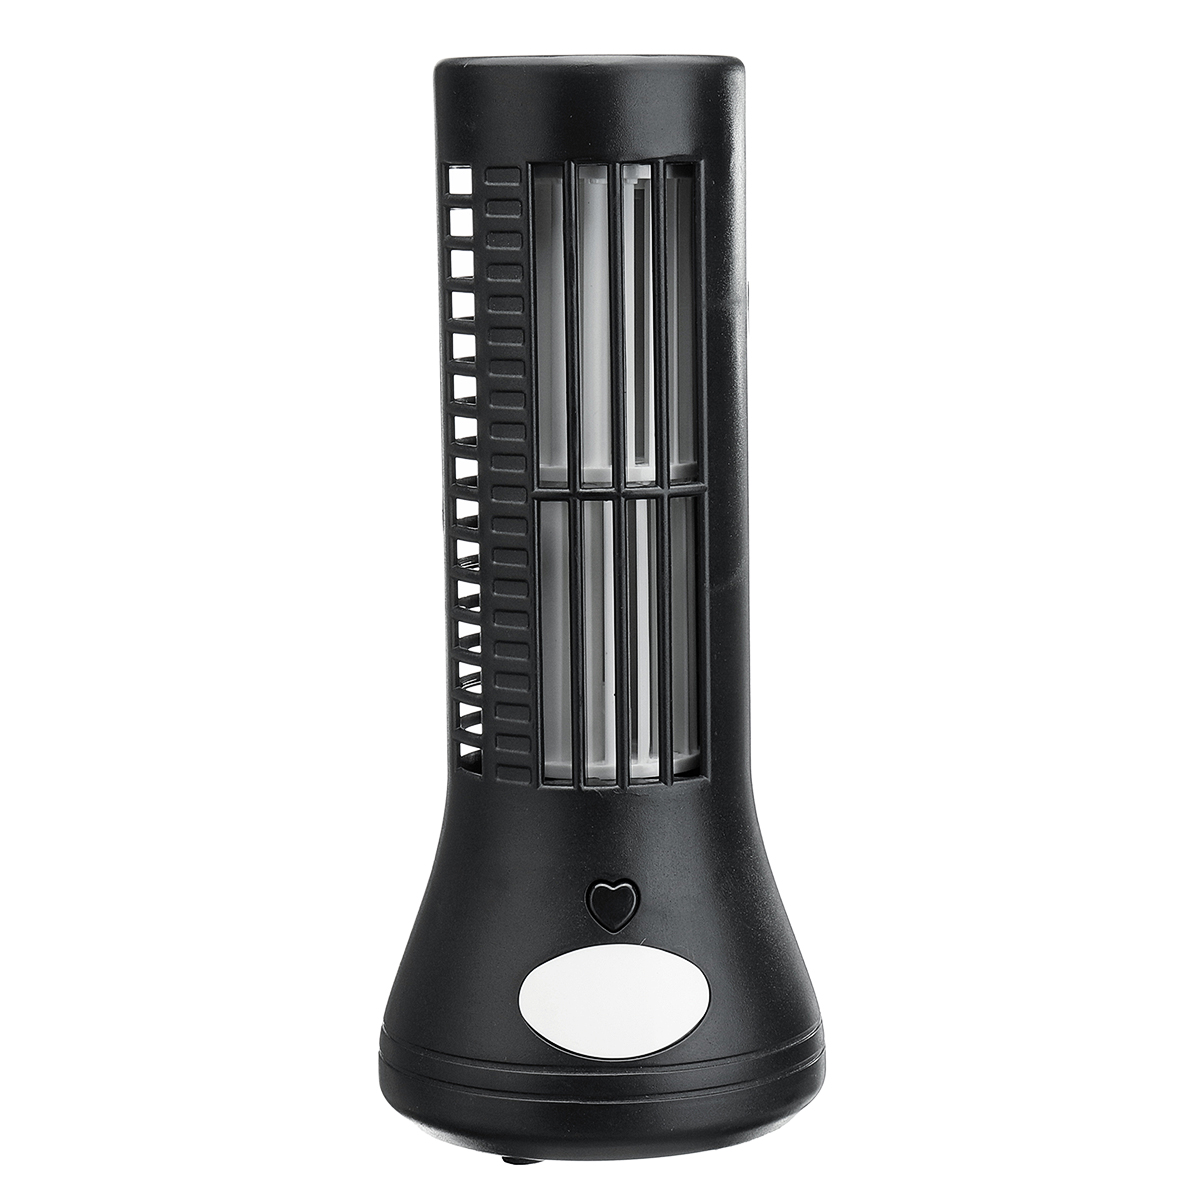 Portable-Fresh-Air-Cooler-Bladeless-Tower-Fan-Humidifier-Conditioning-Ionizer-1336042